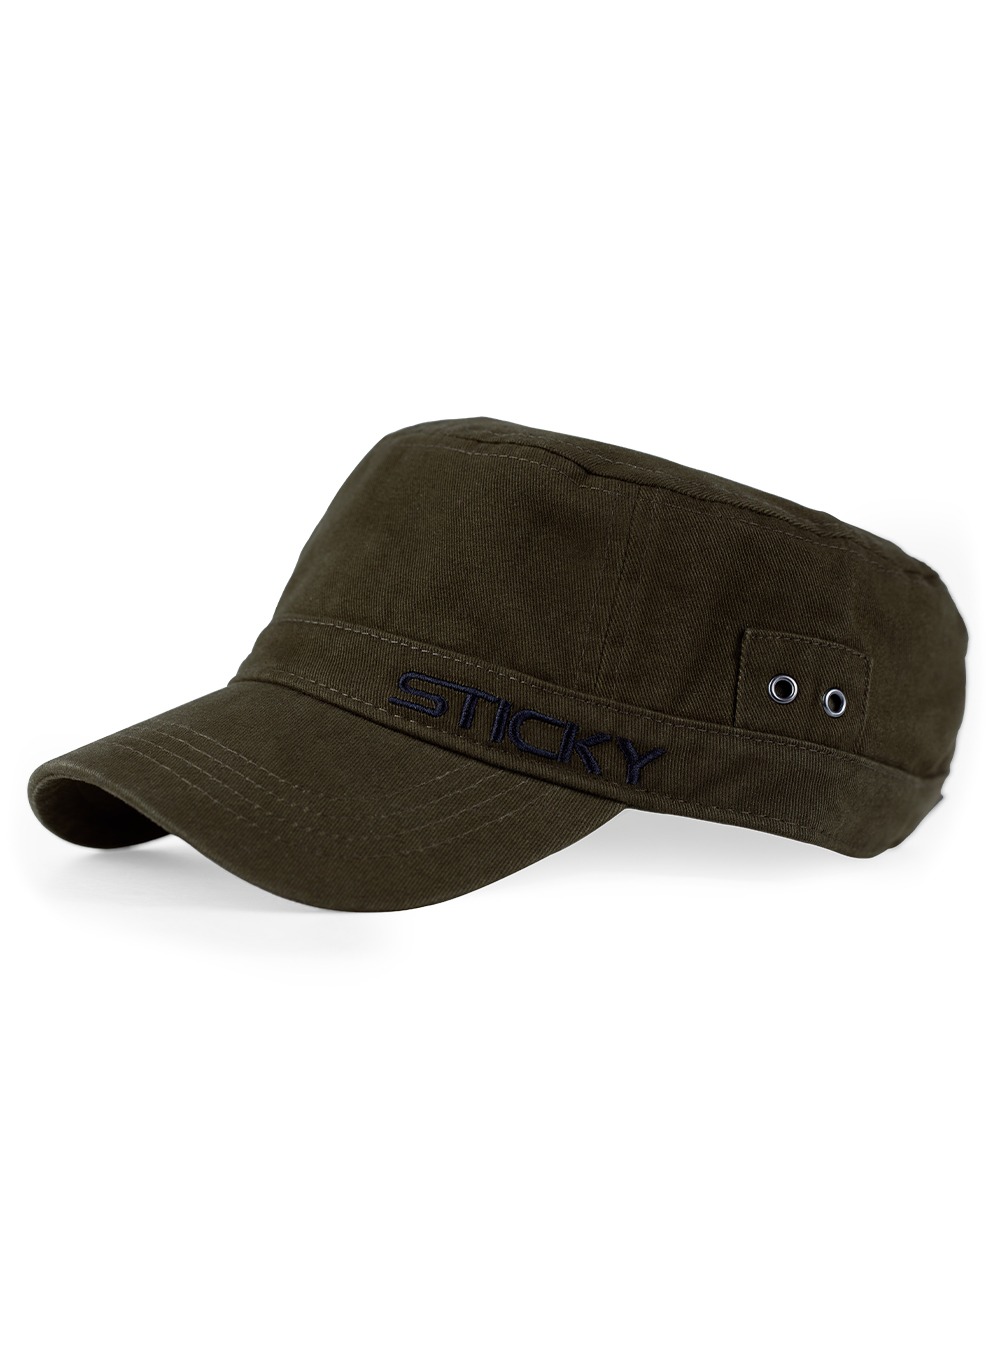 Sticky Baits Olive Military Cap